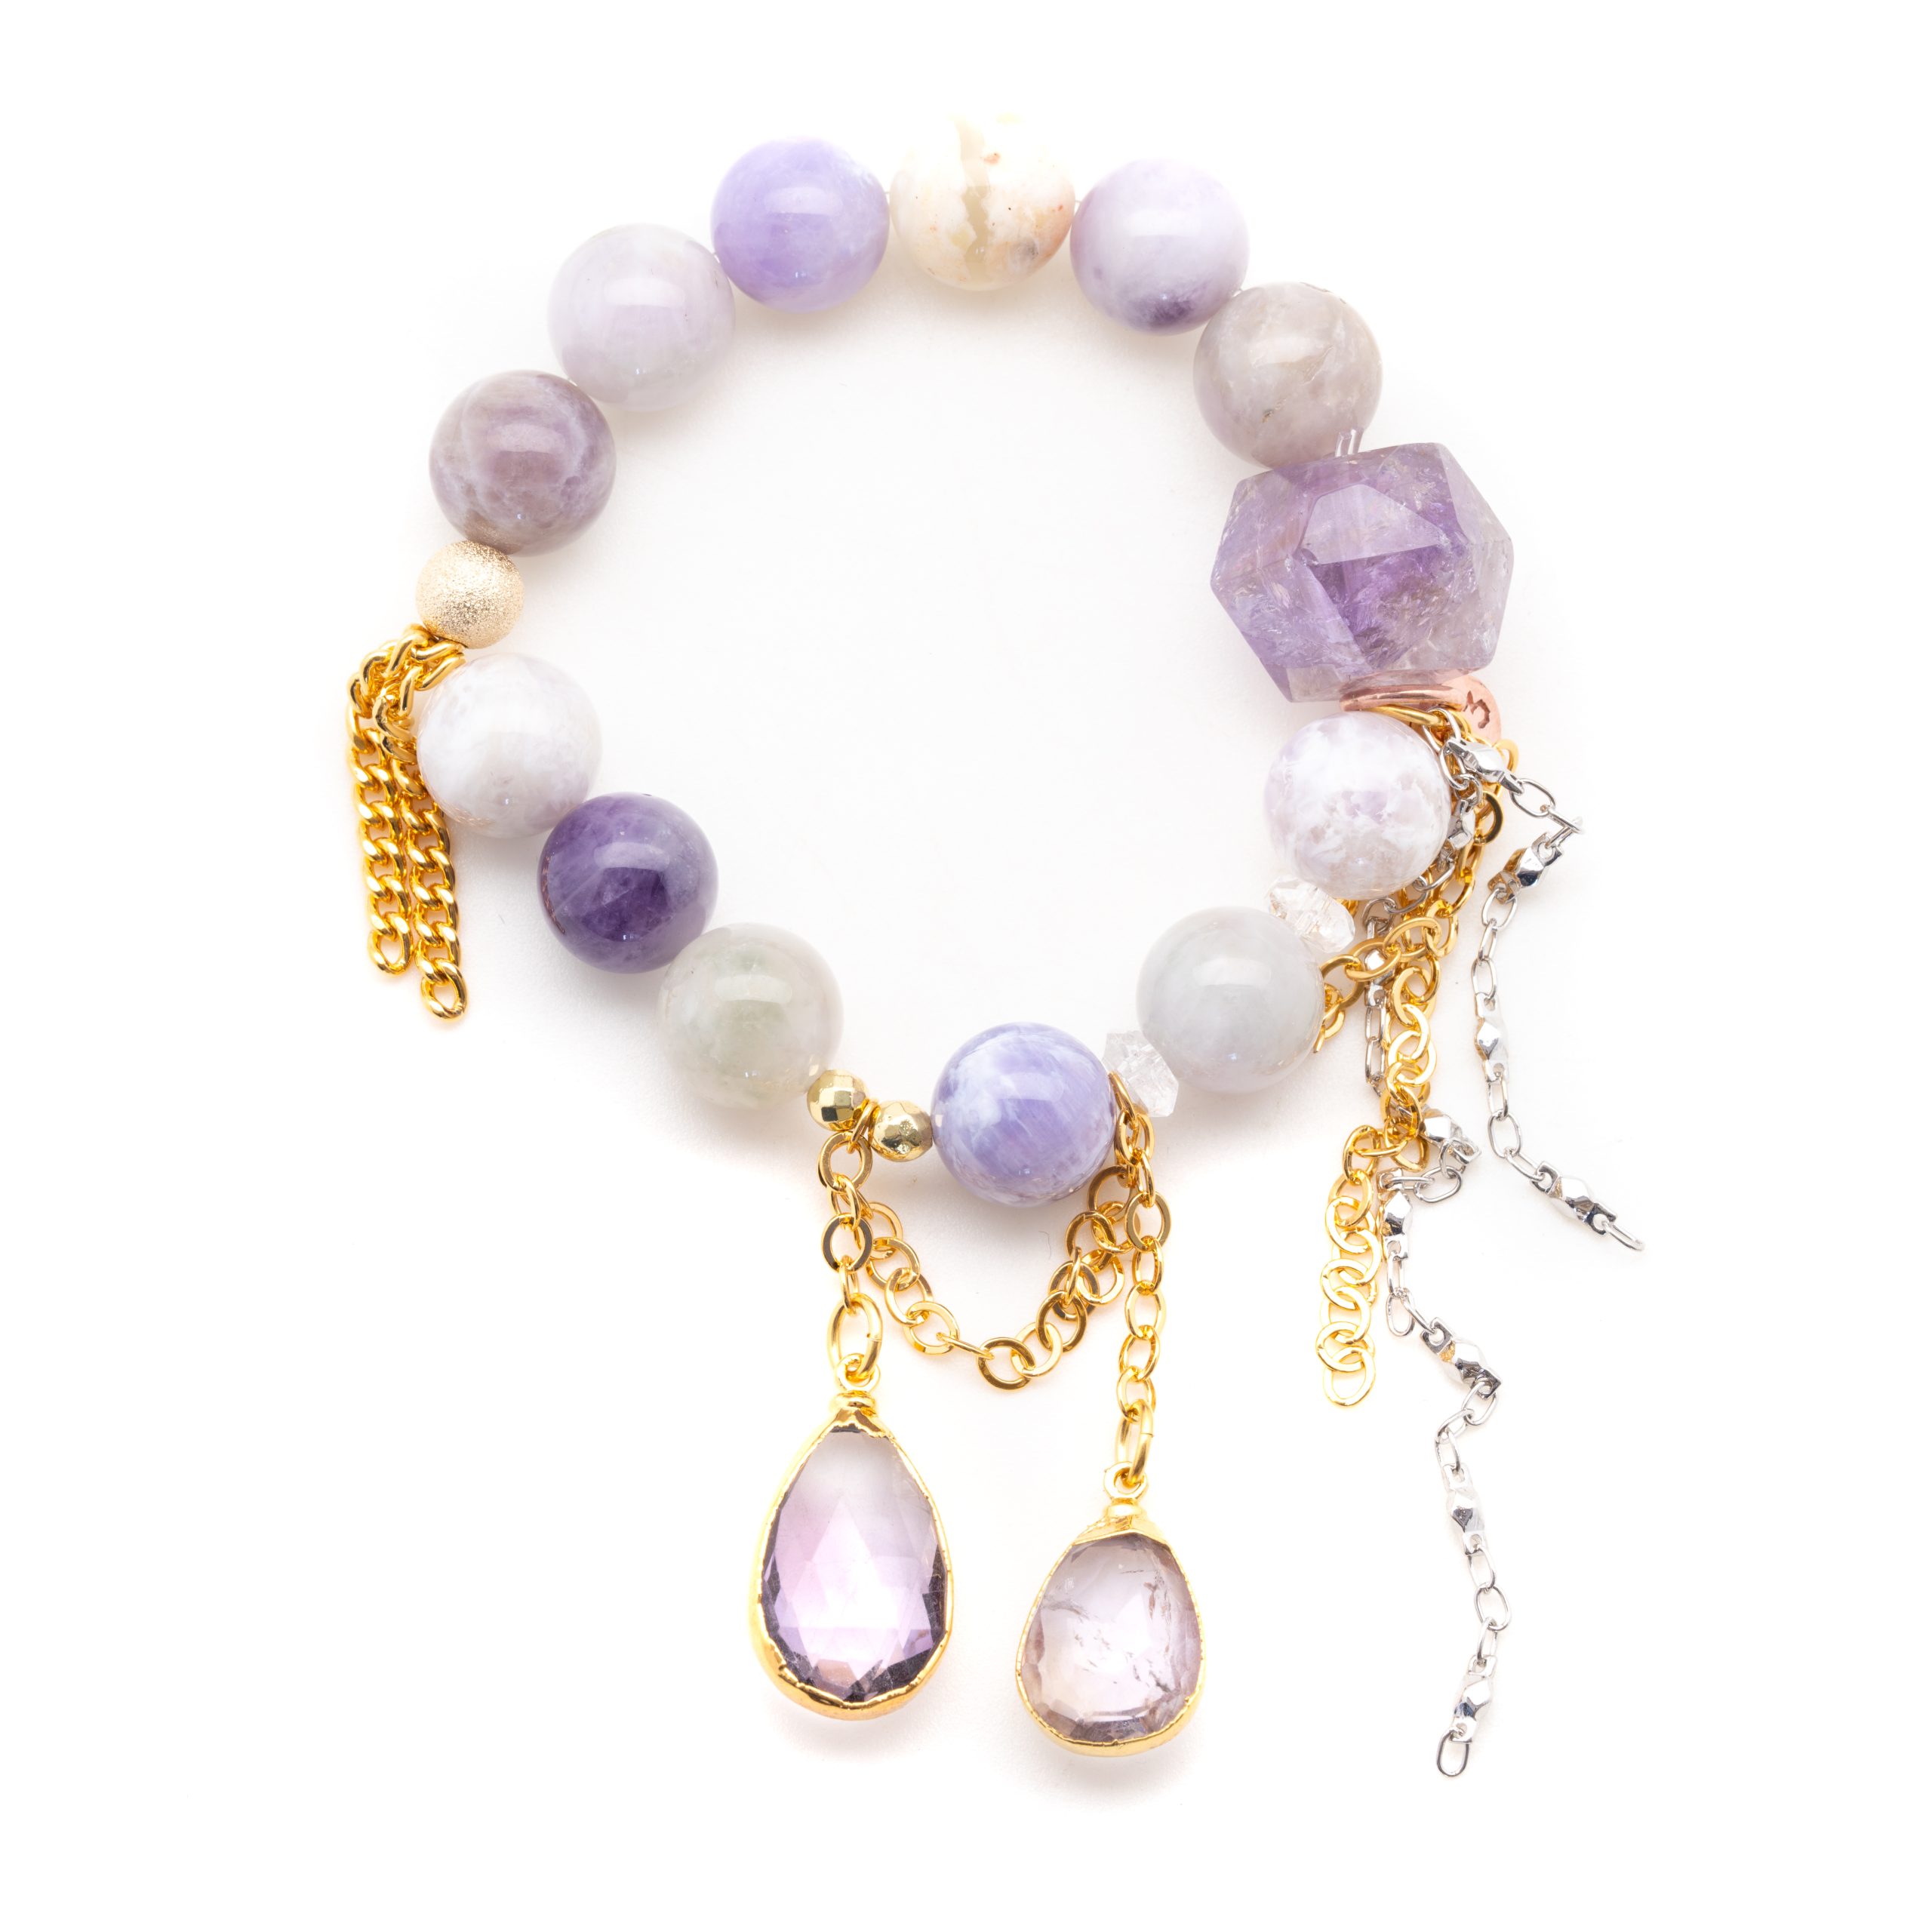 Lavender Opals with an Amethyst Waterfall